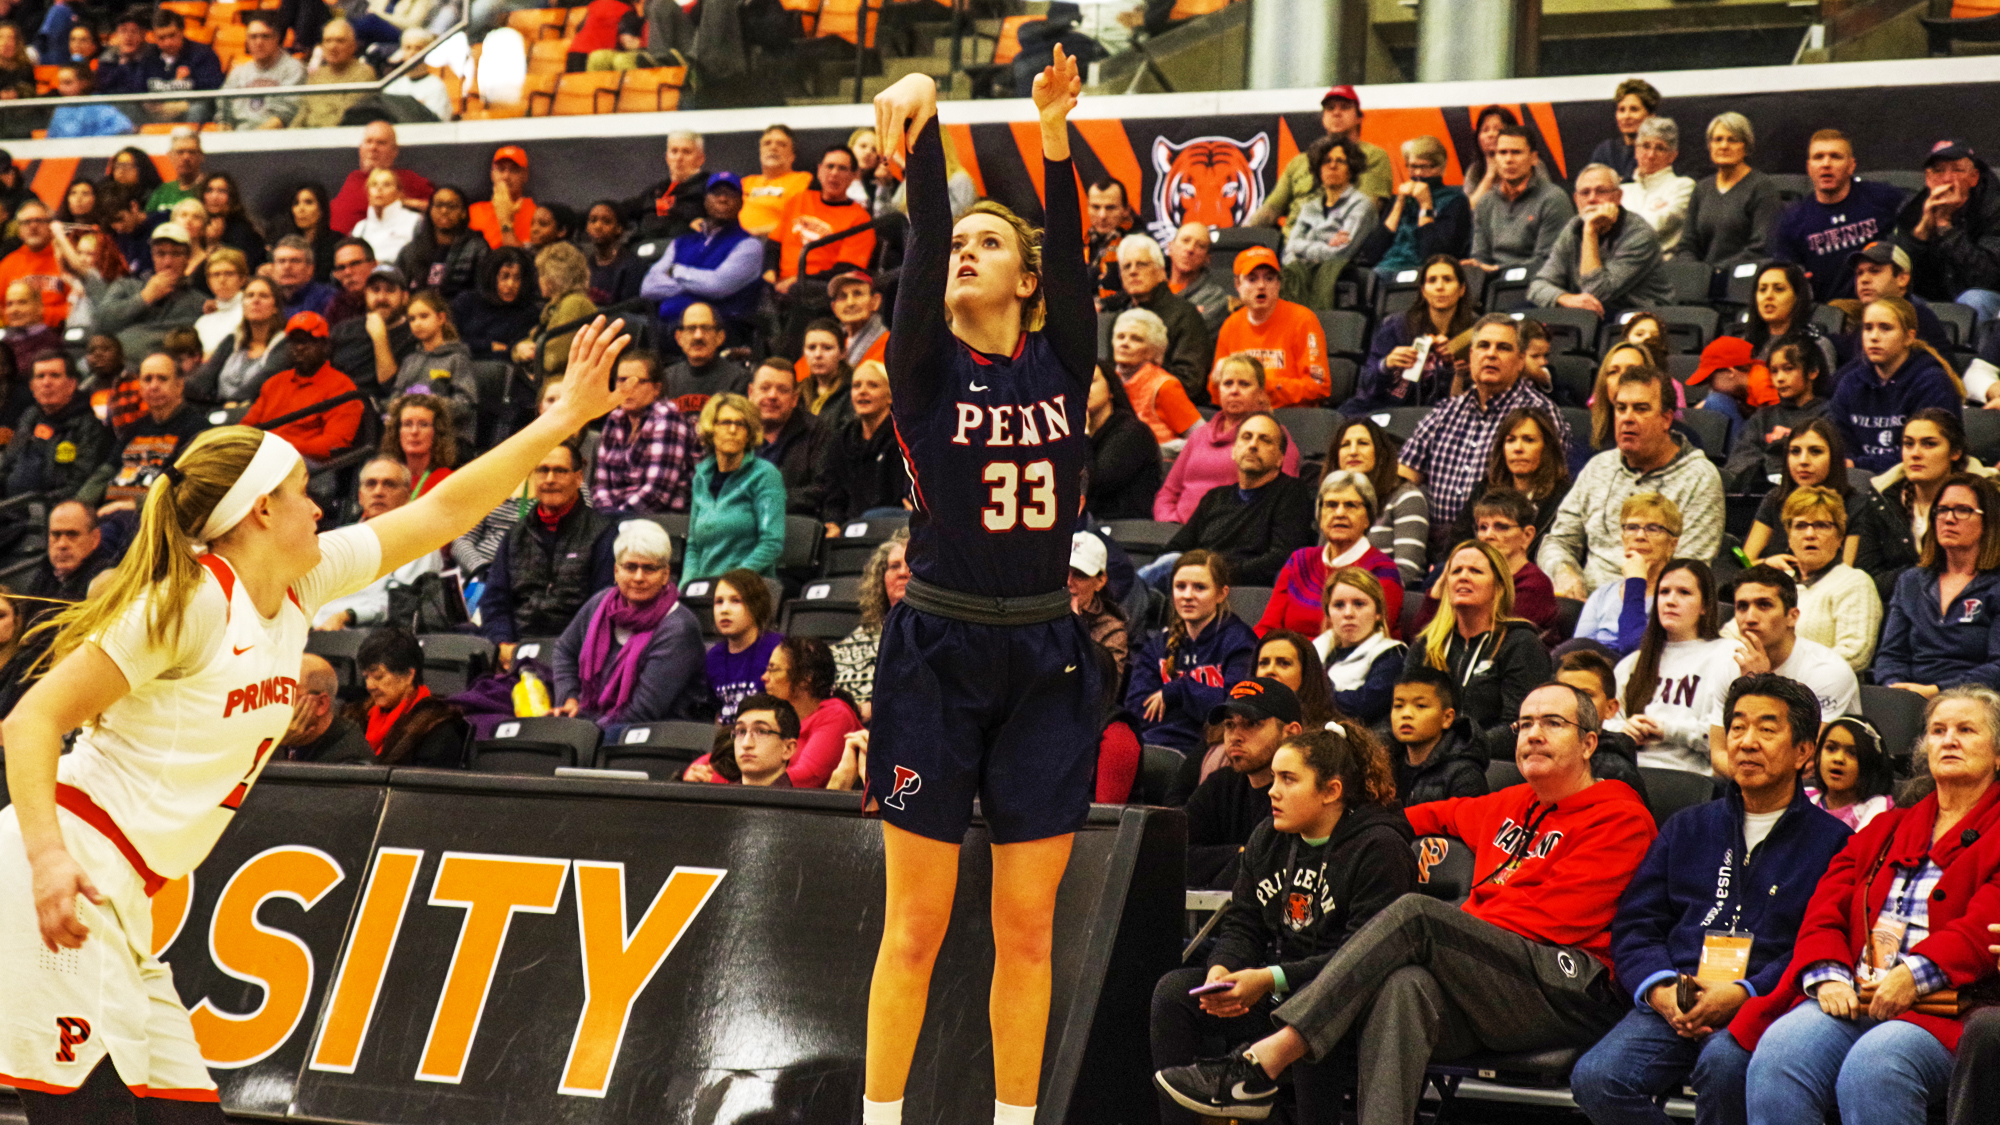 Phoebe Sterba shoots a long-range shot against Princeton in New Jersey.